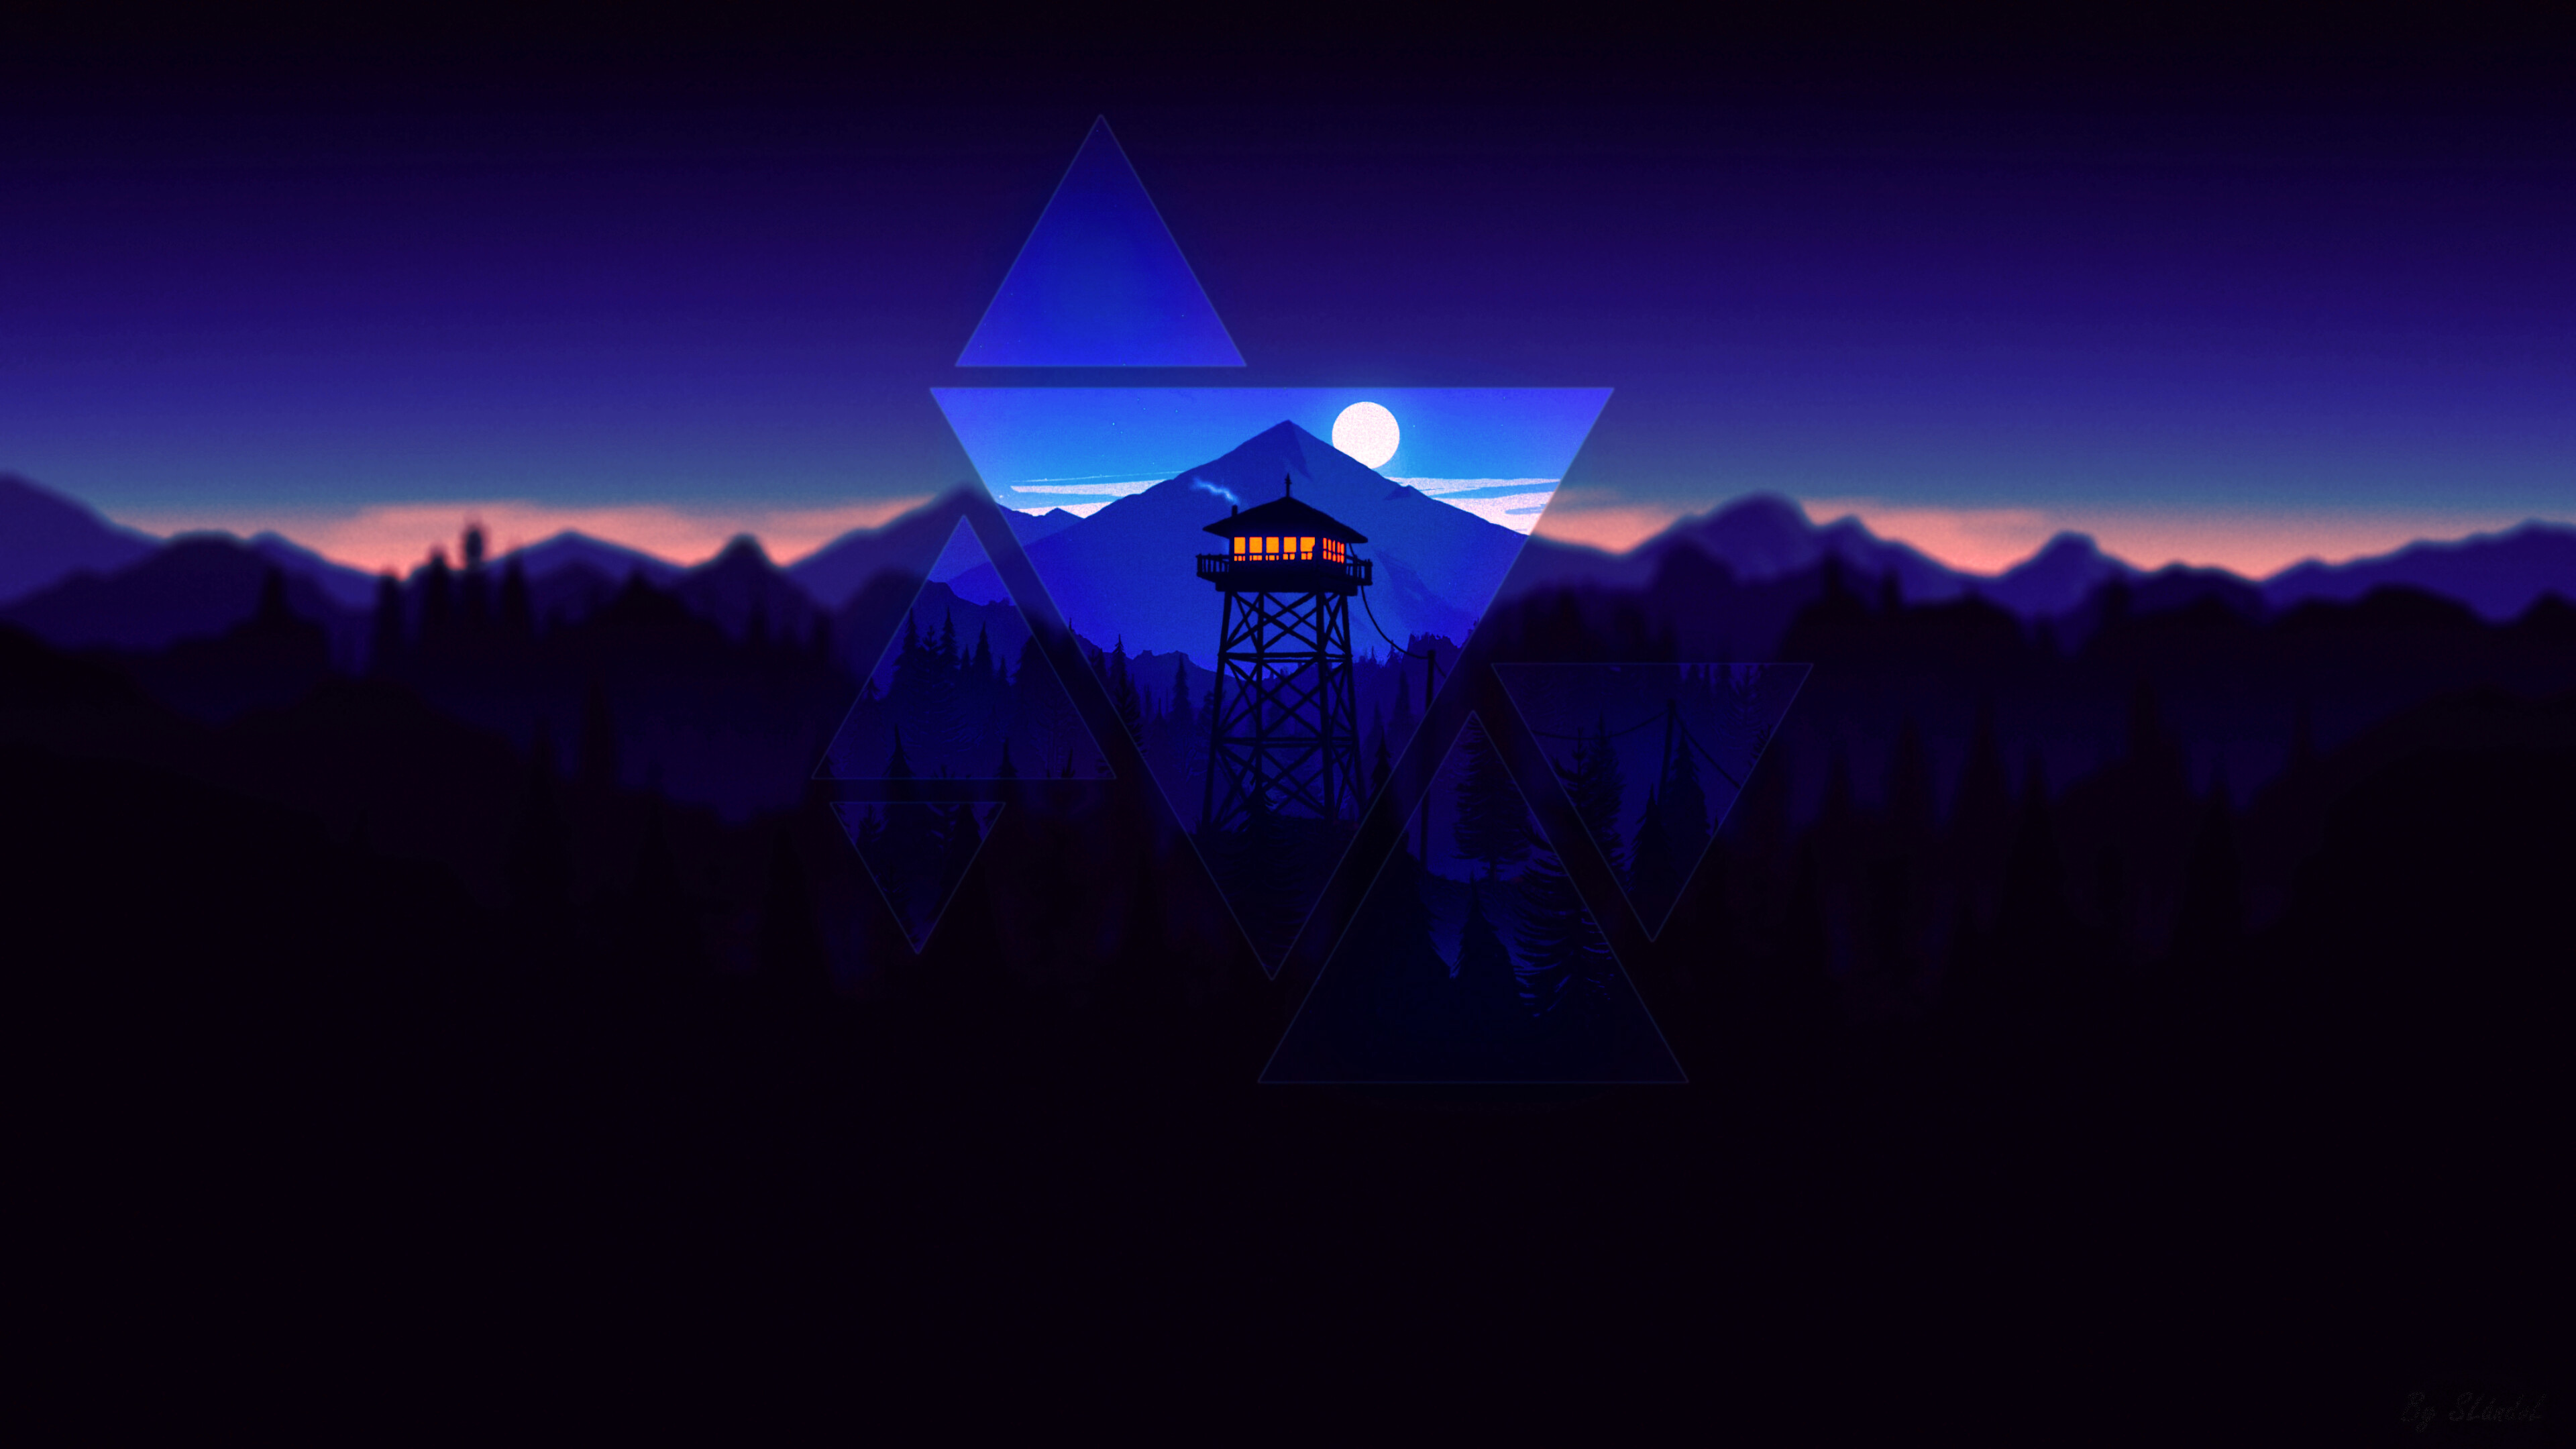 Firewatch: Written by Chris Remo, Jake Rodkin, Olly Moss, and Sean Vanaman, Video game. 3840x2160 4K Background.